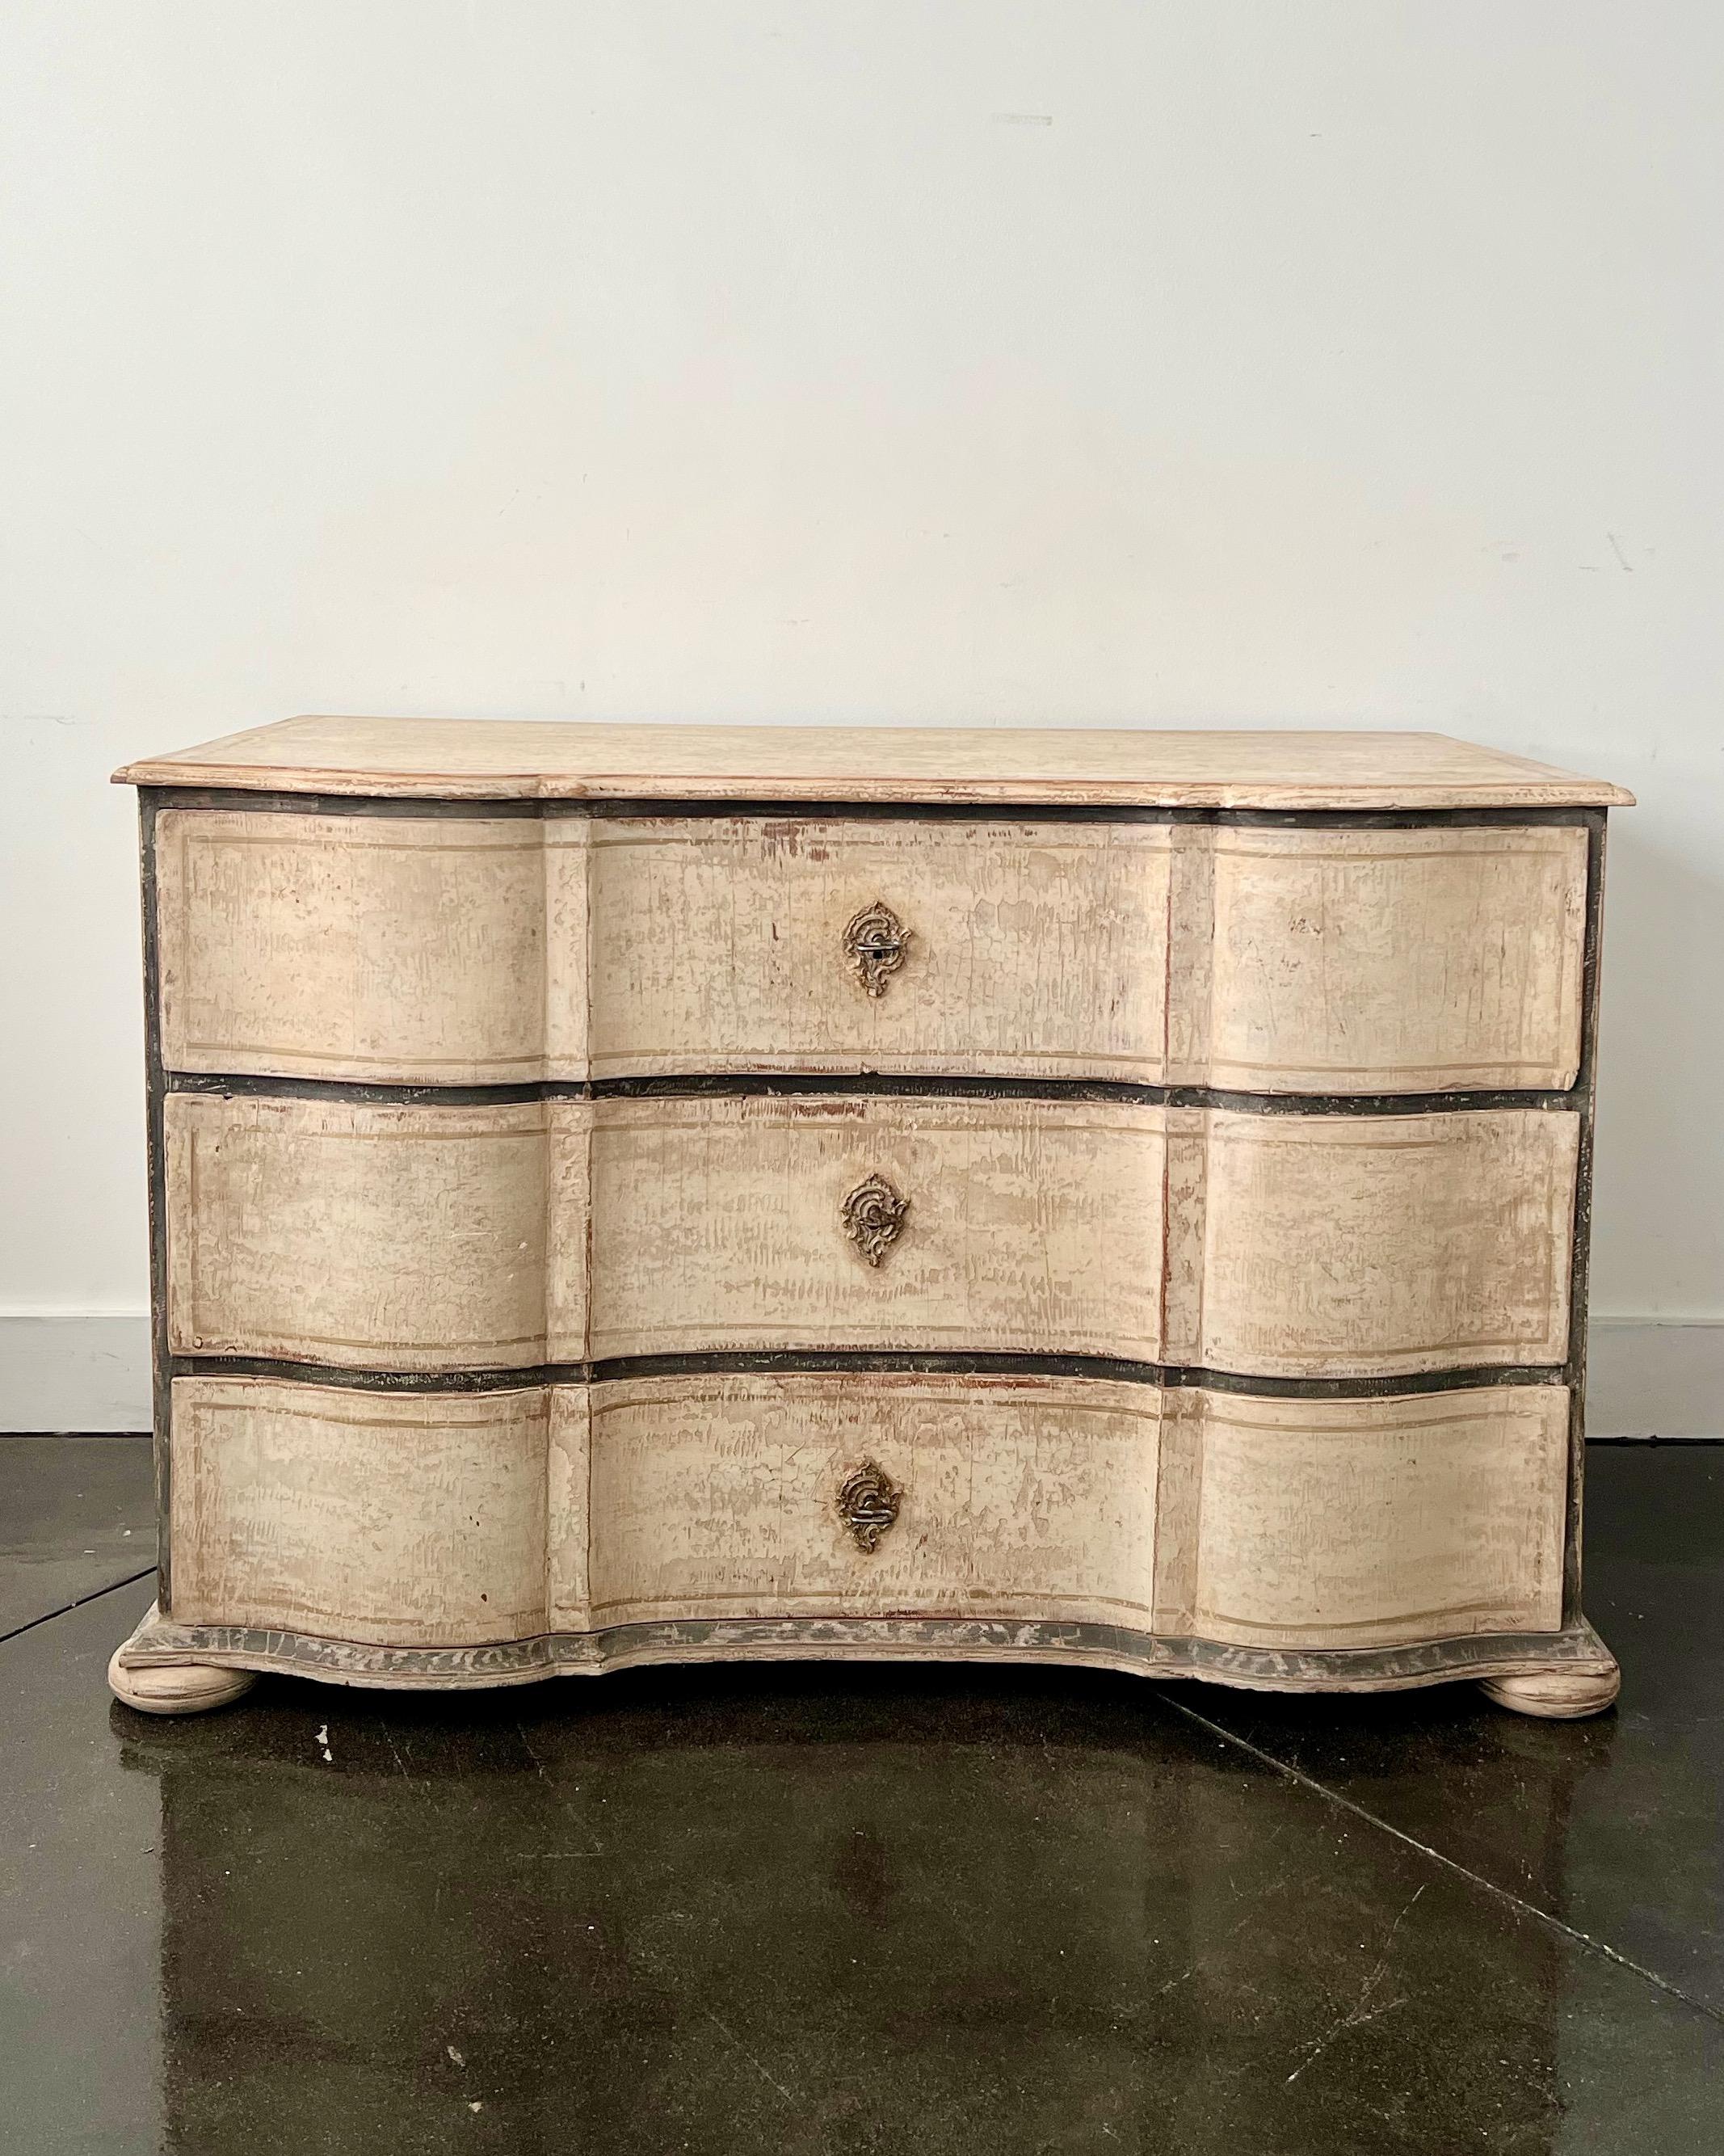 18th century Large chest of three drawers from late Baroque period in richly carved curvaceous serpentine drawer fronts, shaped top and on bun feet in super later patinated paint. Large very good condition sturdy antique piece.
Germany
More than